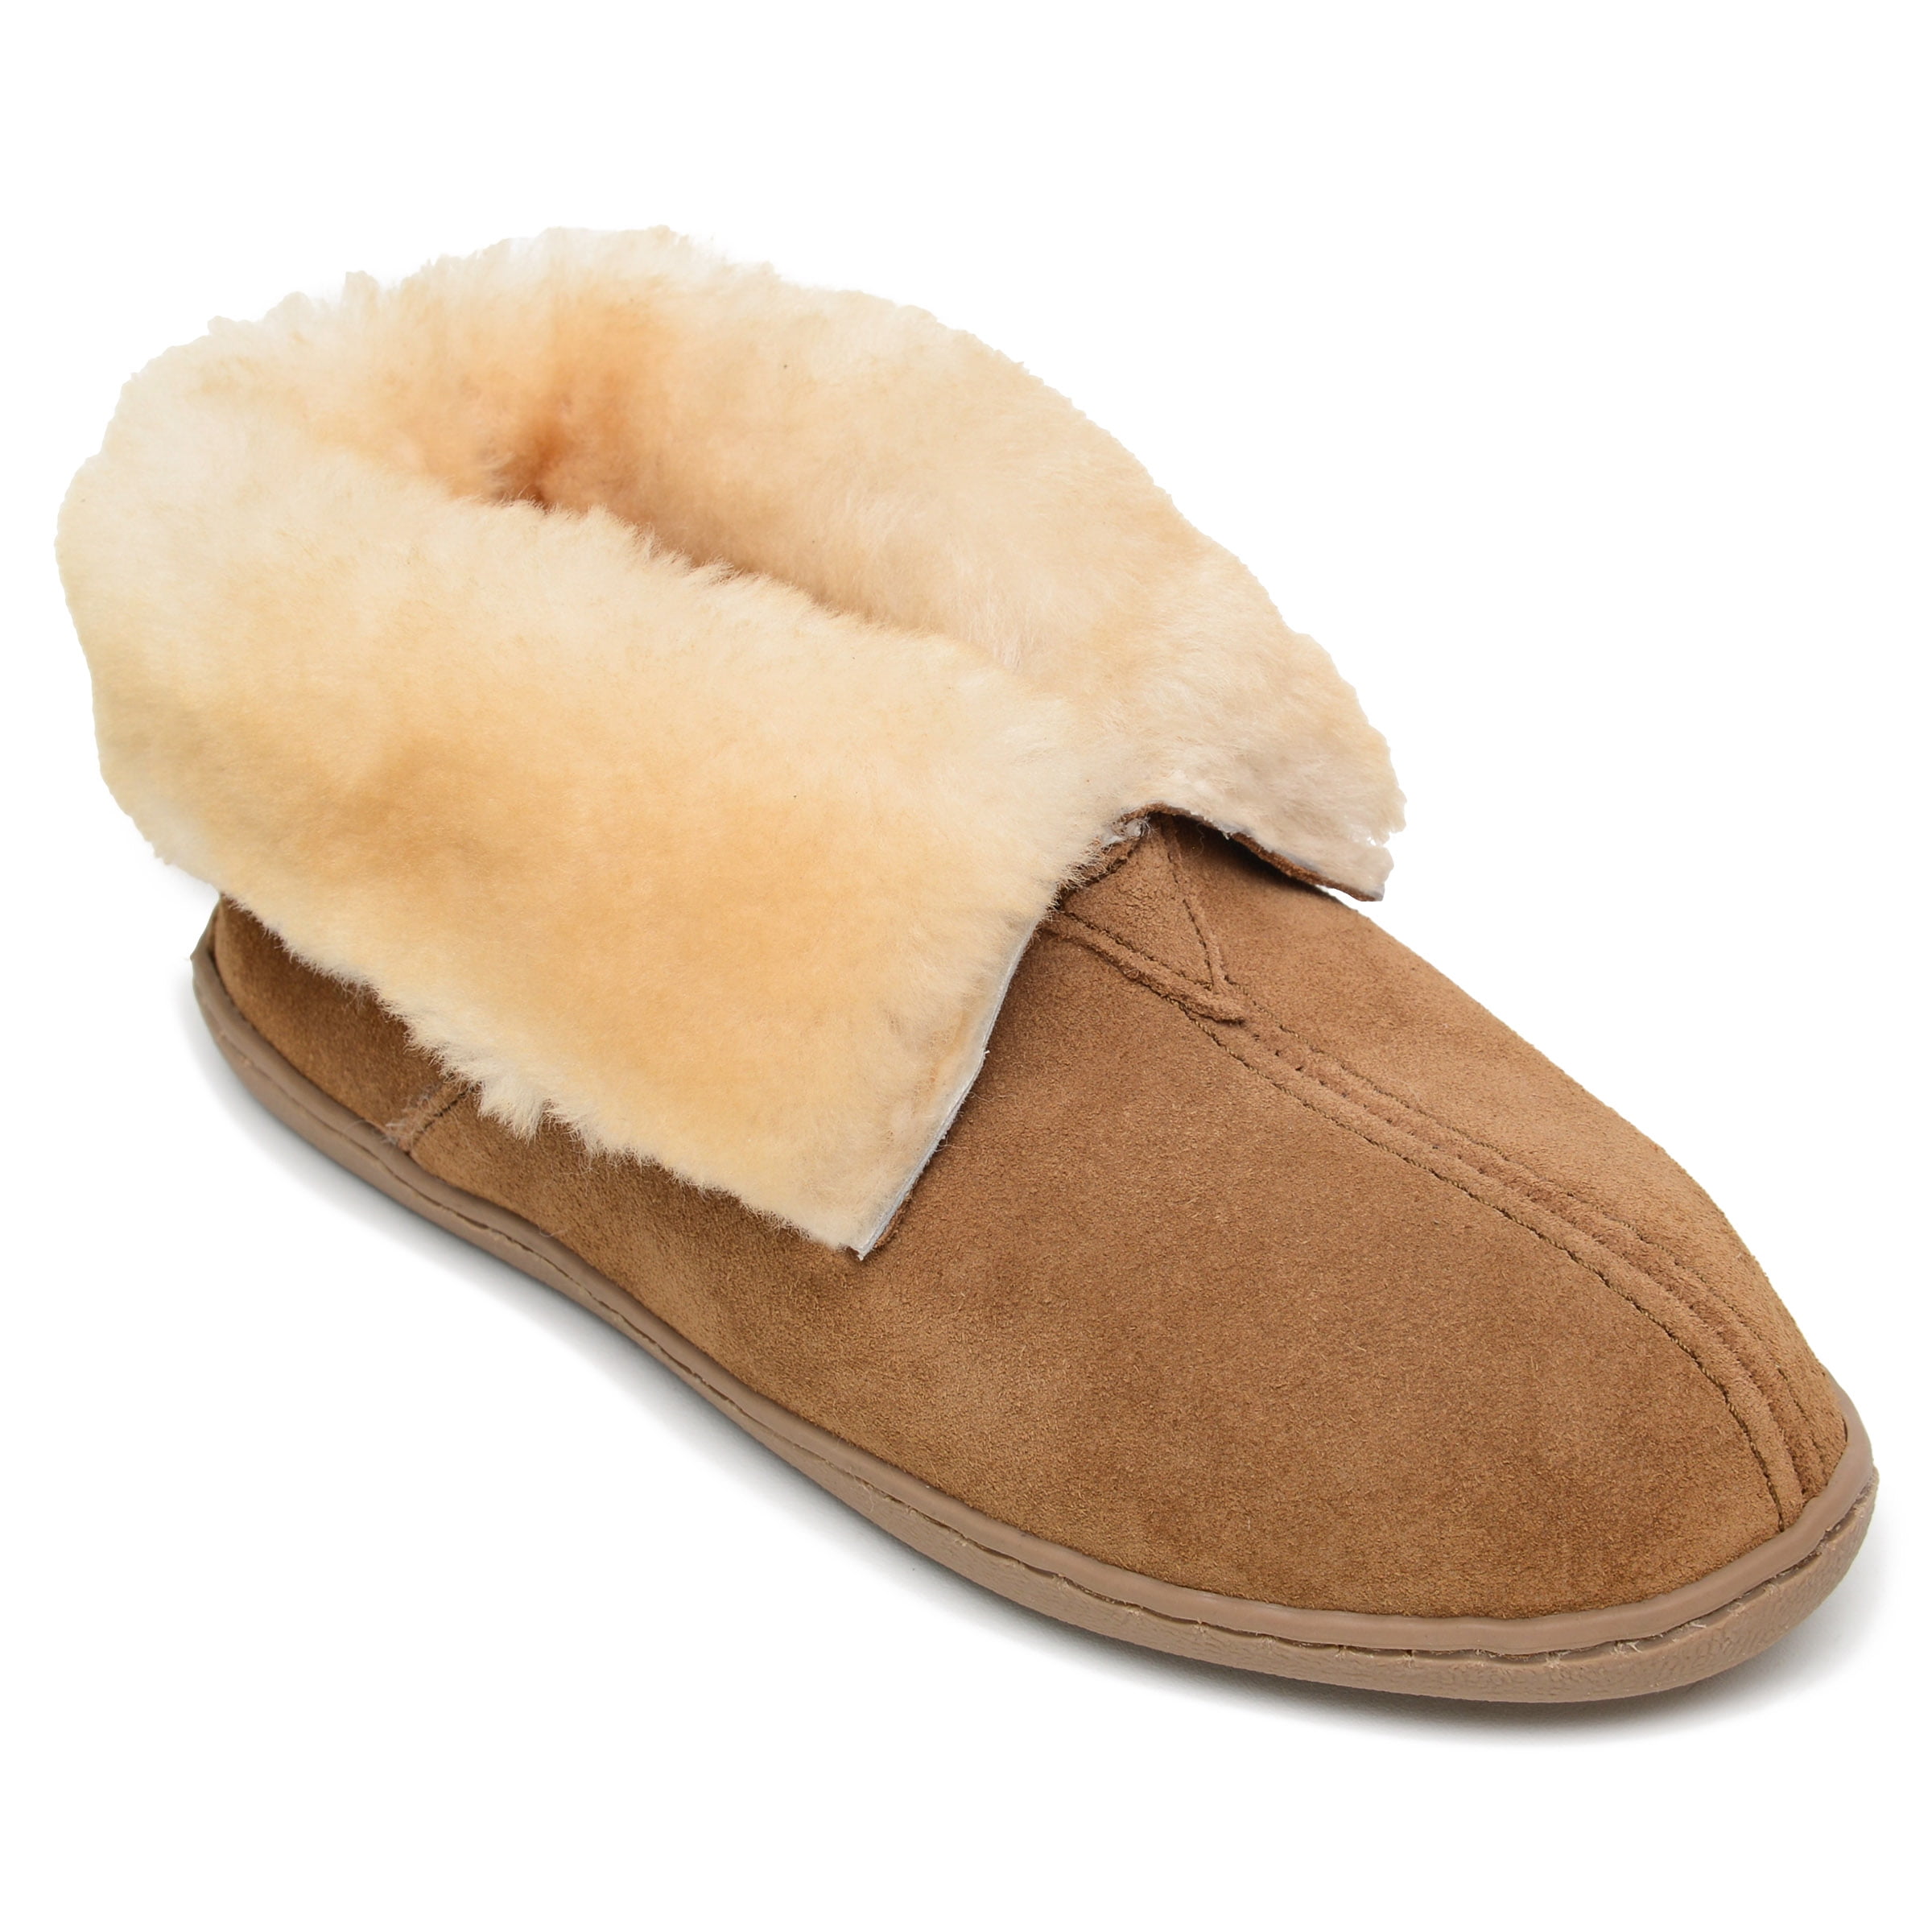 Hand Crafted Luxury Men's Women's Sheepskin Boot Slippers 100% Real Fur Lined 